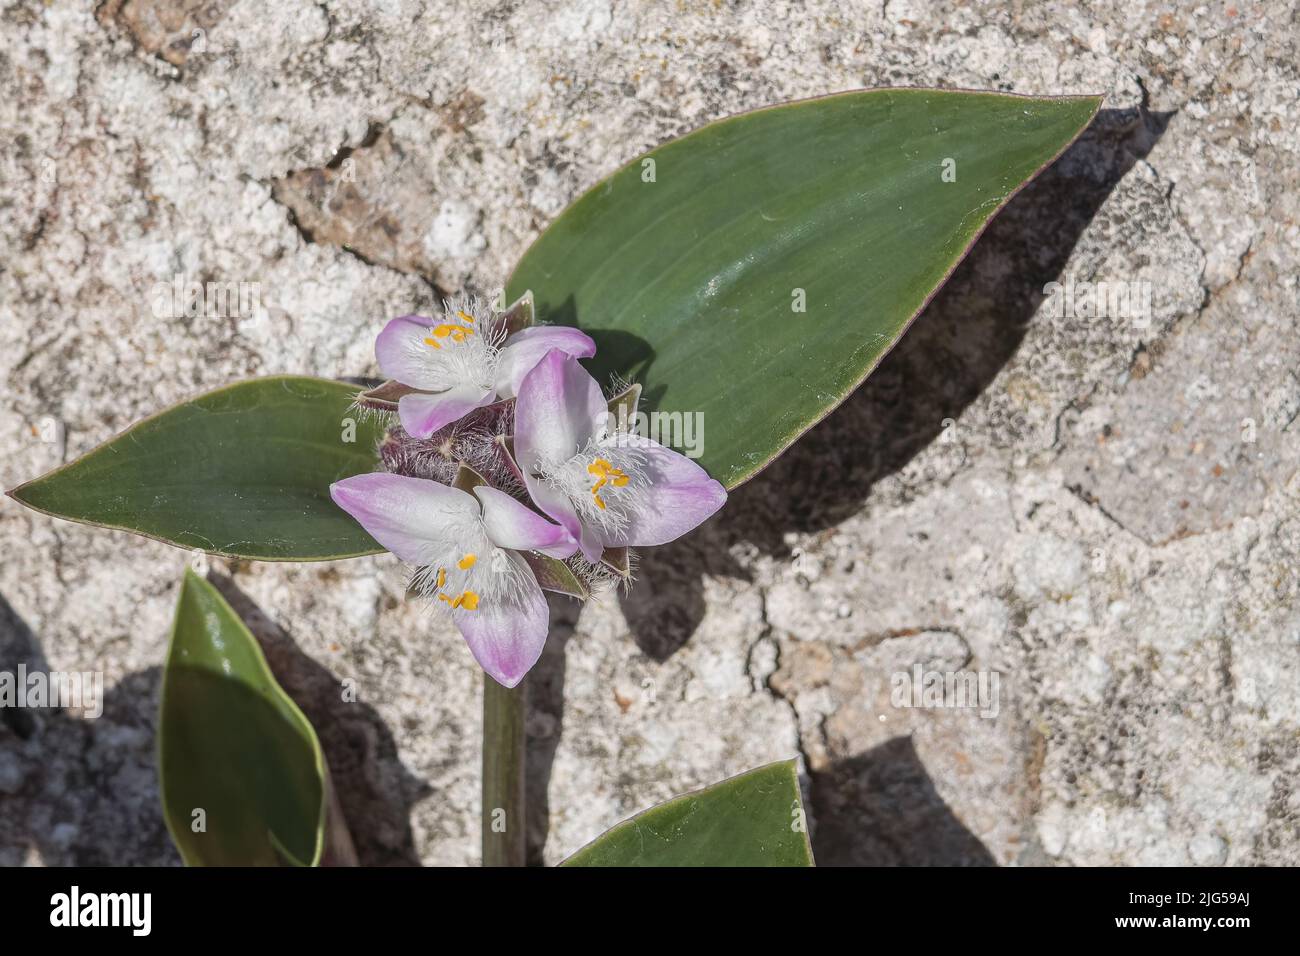 flowers, bulbs and leaves of the tradescantia plant seen up close in sunlight outdoors Stock Photo